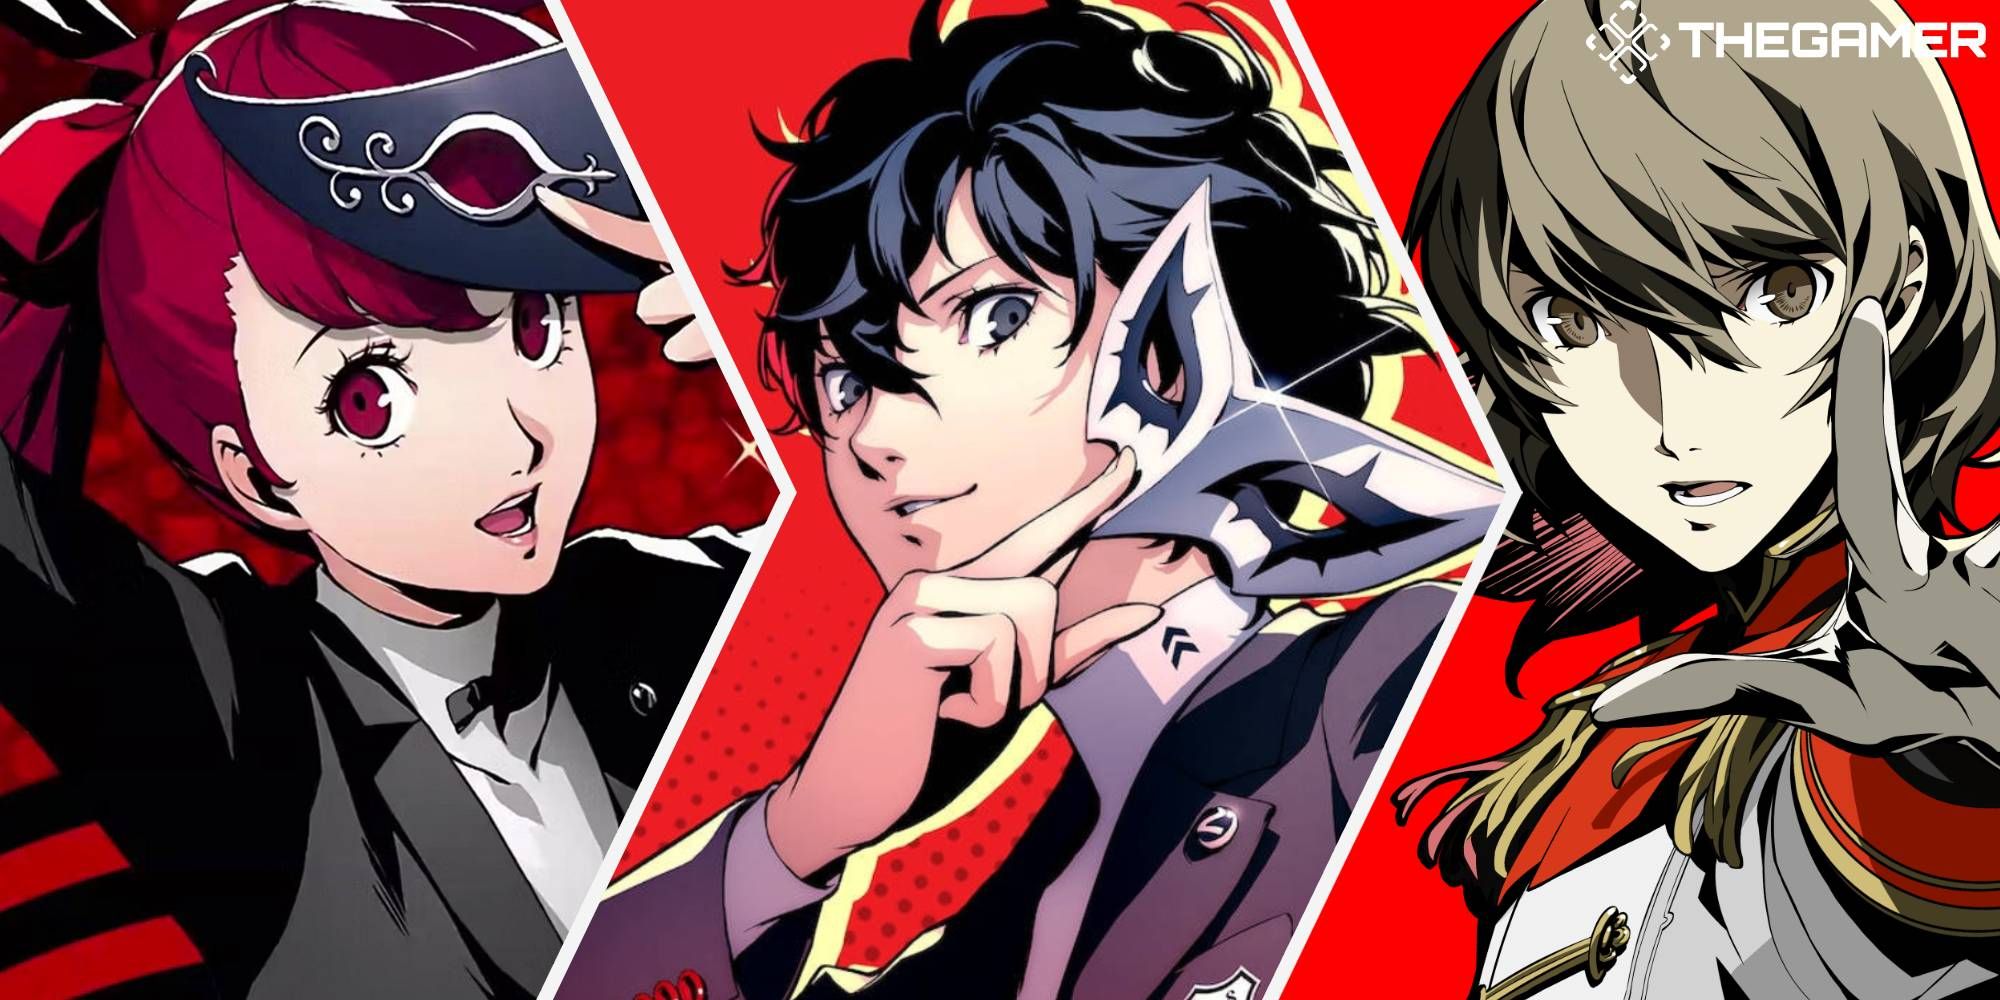 Kasumi, Joker, and Akechi standing side-by-side in Persona 5 Royal.